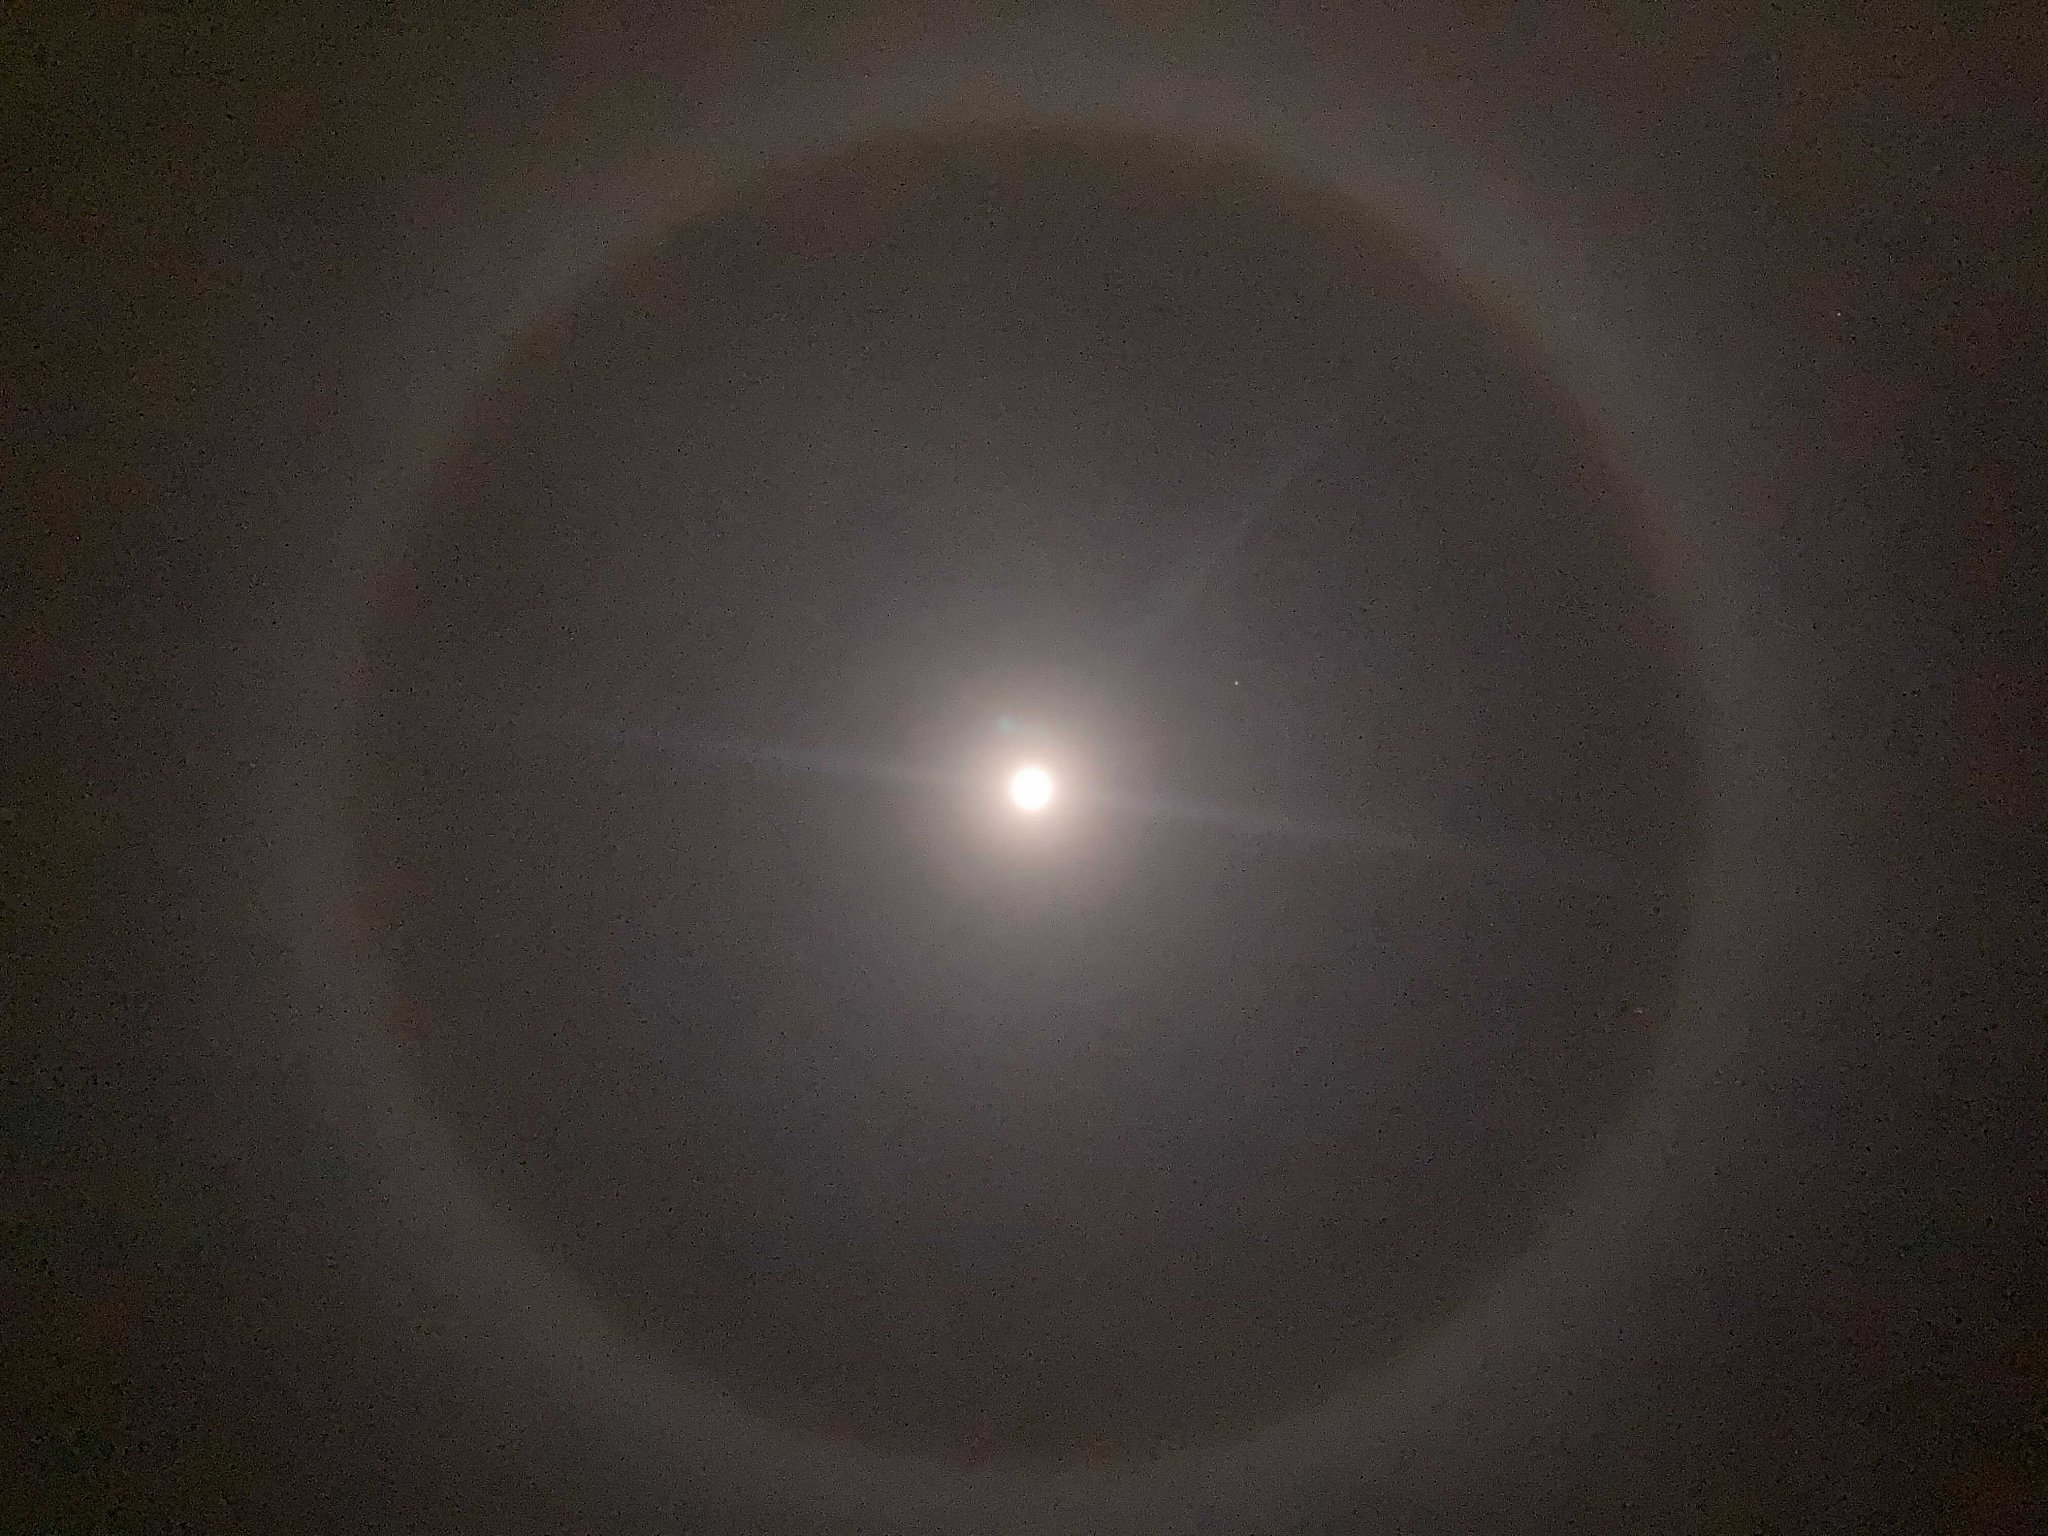 Why the moon above the Bay had a halo on Saturday night